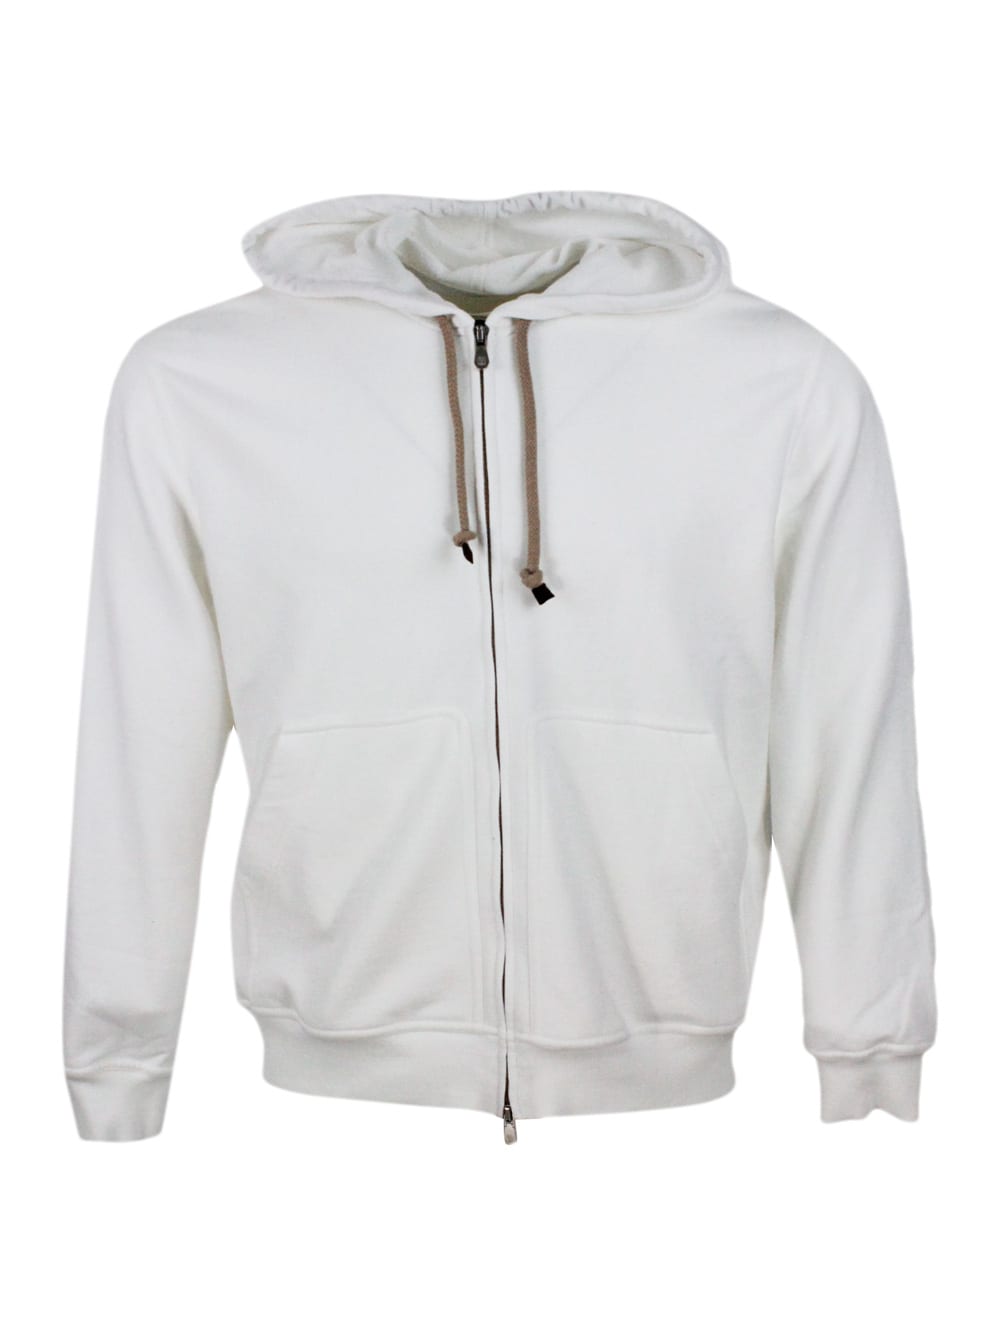 Shop Brunello Cucinelli Hooded Sweatshirt With Drawstring In Soft And Precious Cotton With Zip Closure In White